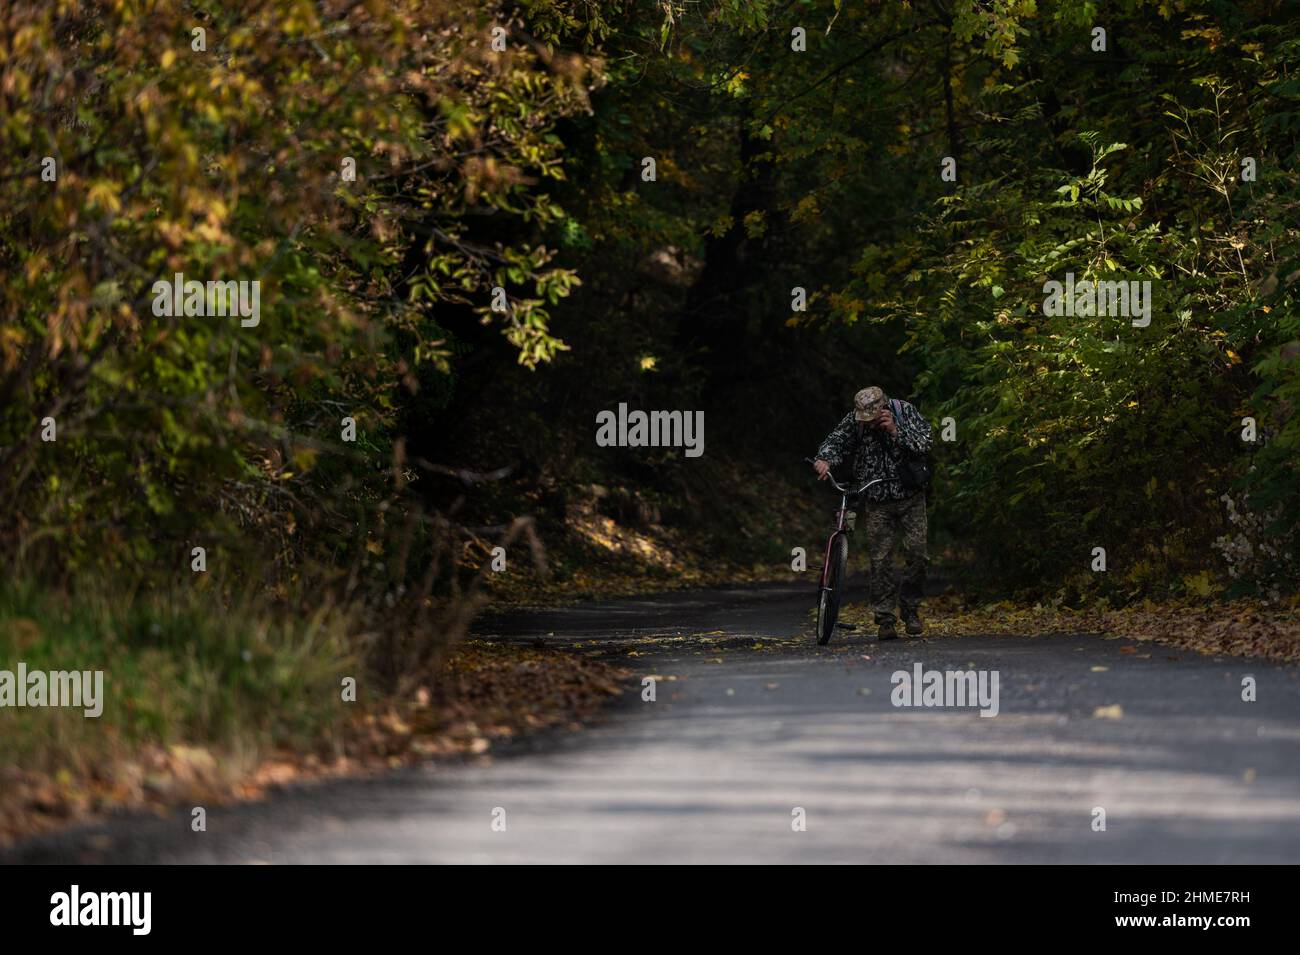 A man on the phone wearing camouflage pushes his bike up a hill in Chernobyl, near the Chernobyl Nuclear Power Plant. Stock Photo